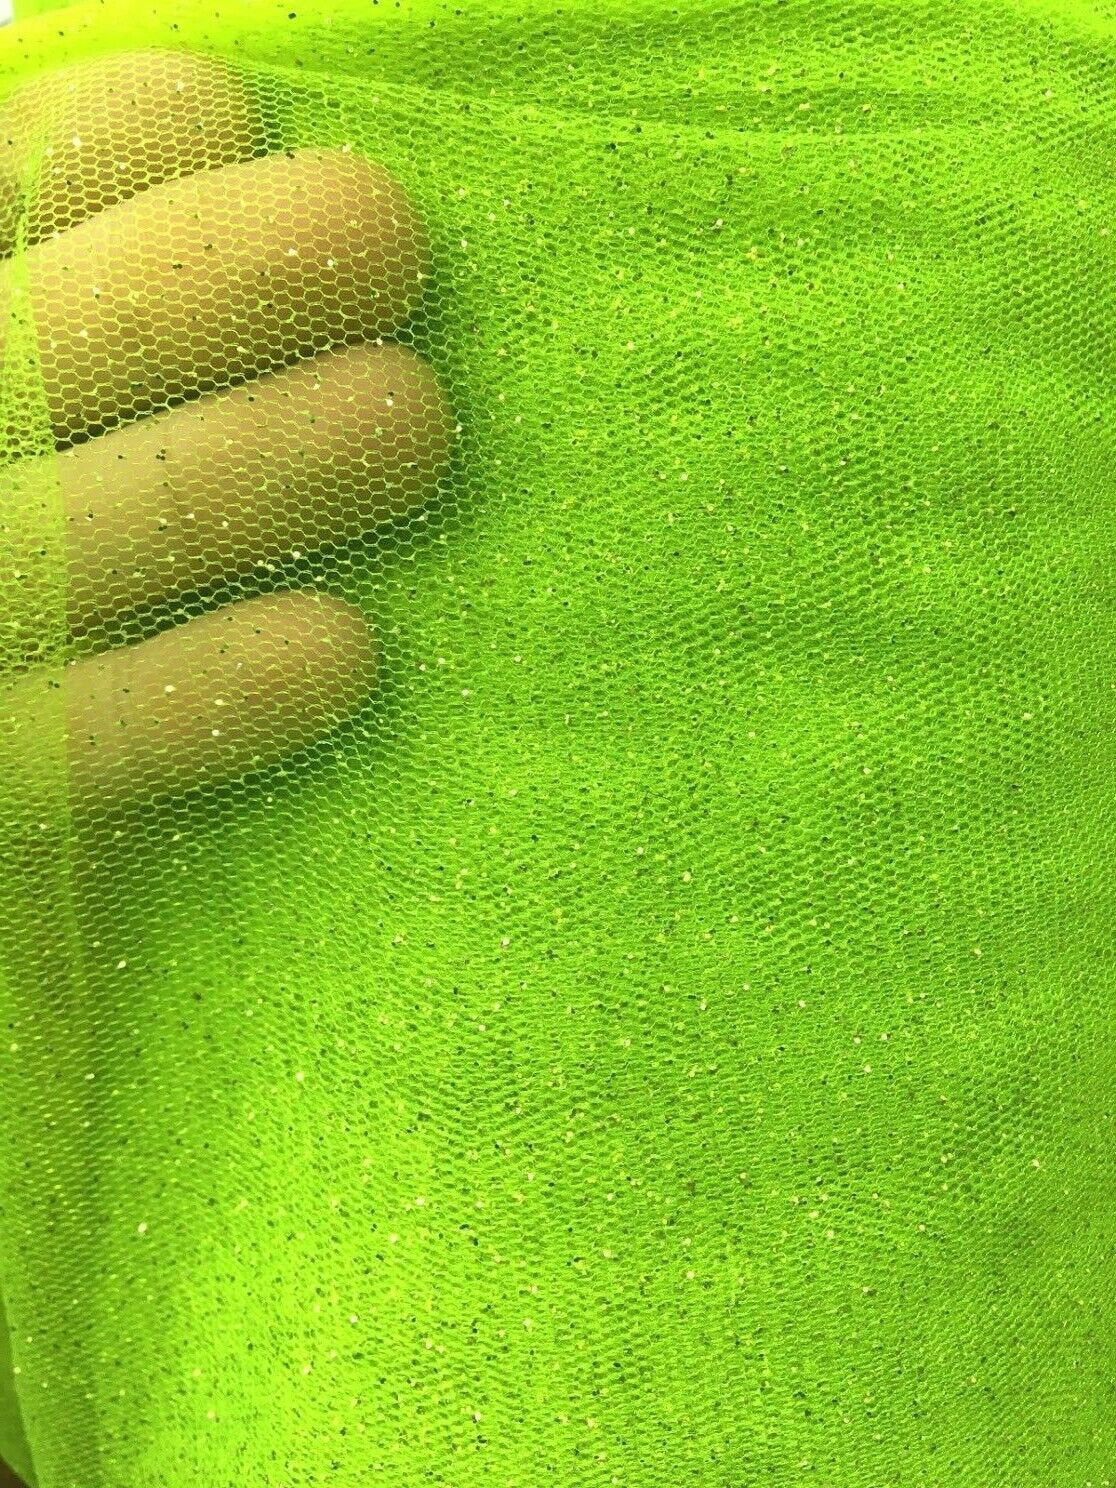 NEON GREEN Sparkle Glitter Tulle Decoration Event Fabric (60 in.) Sold By The Yard